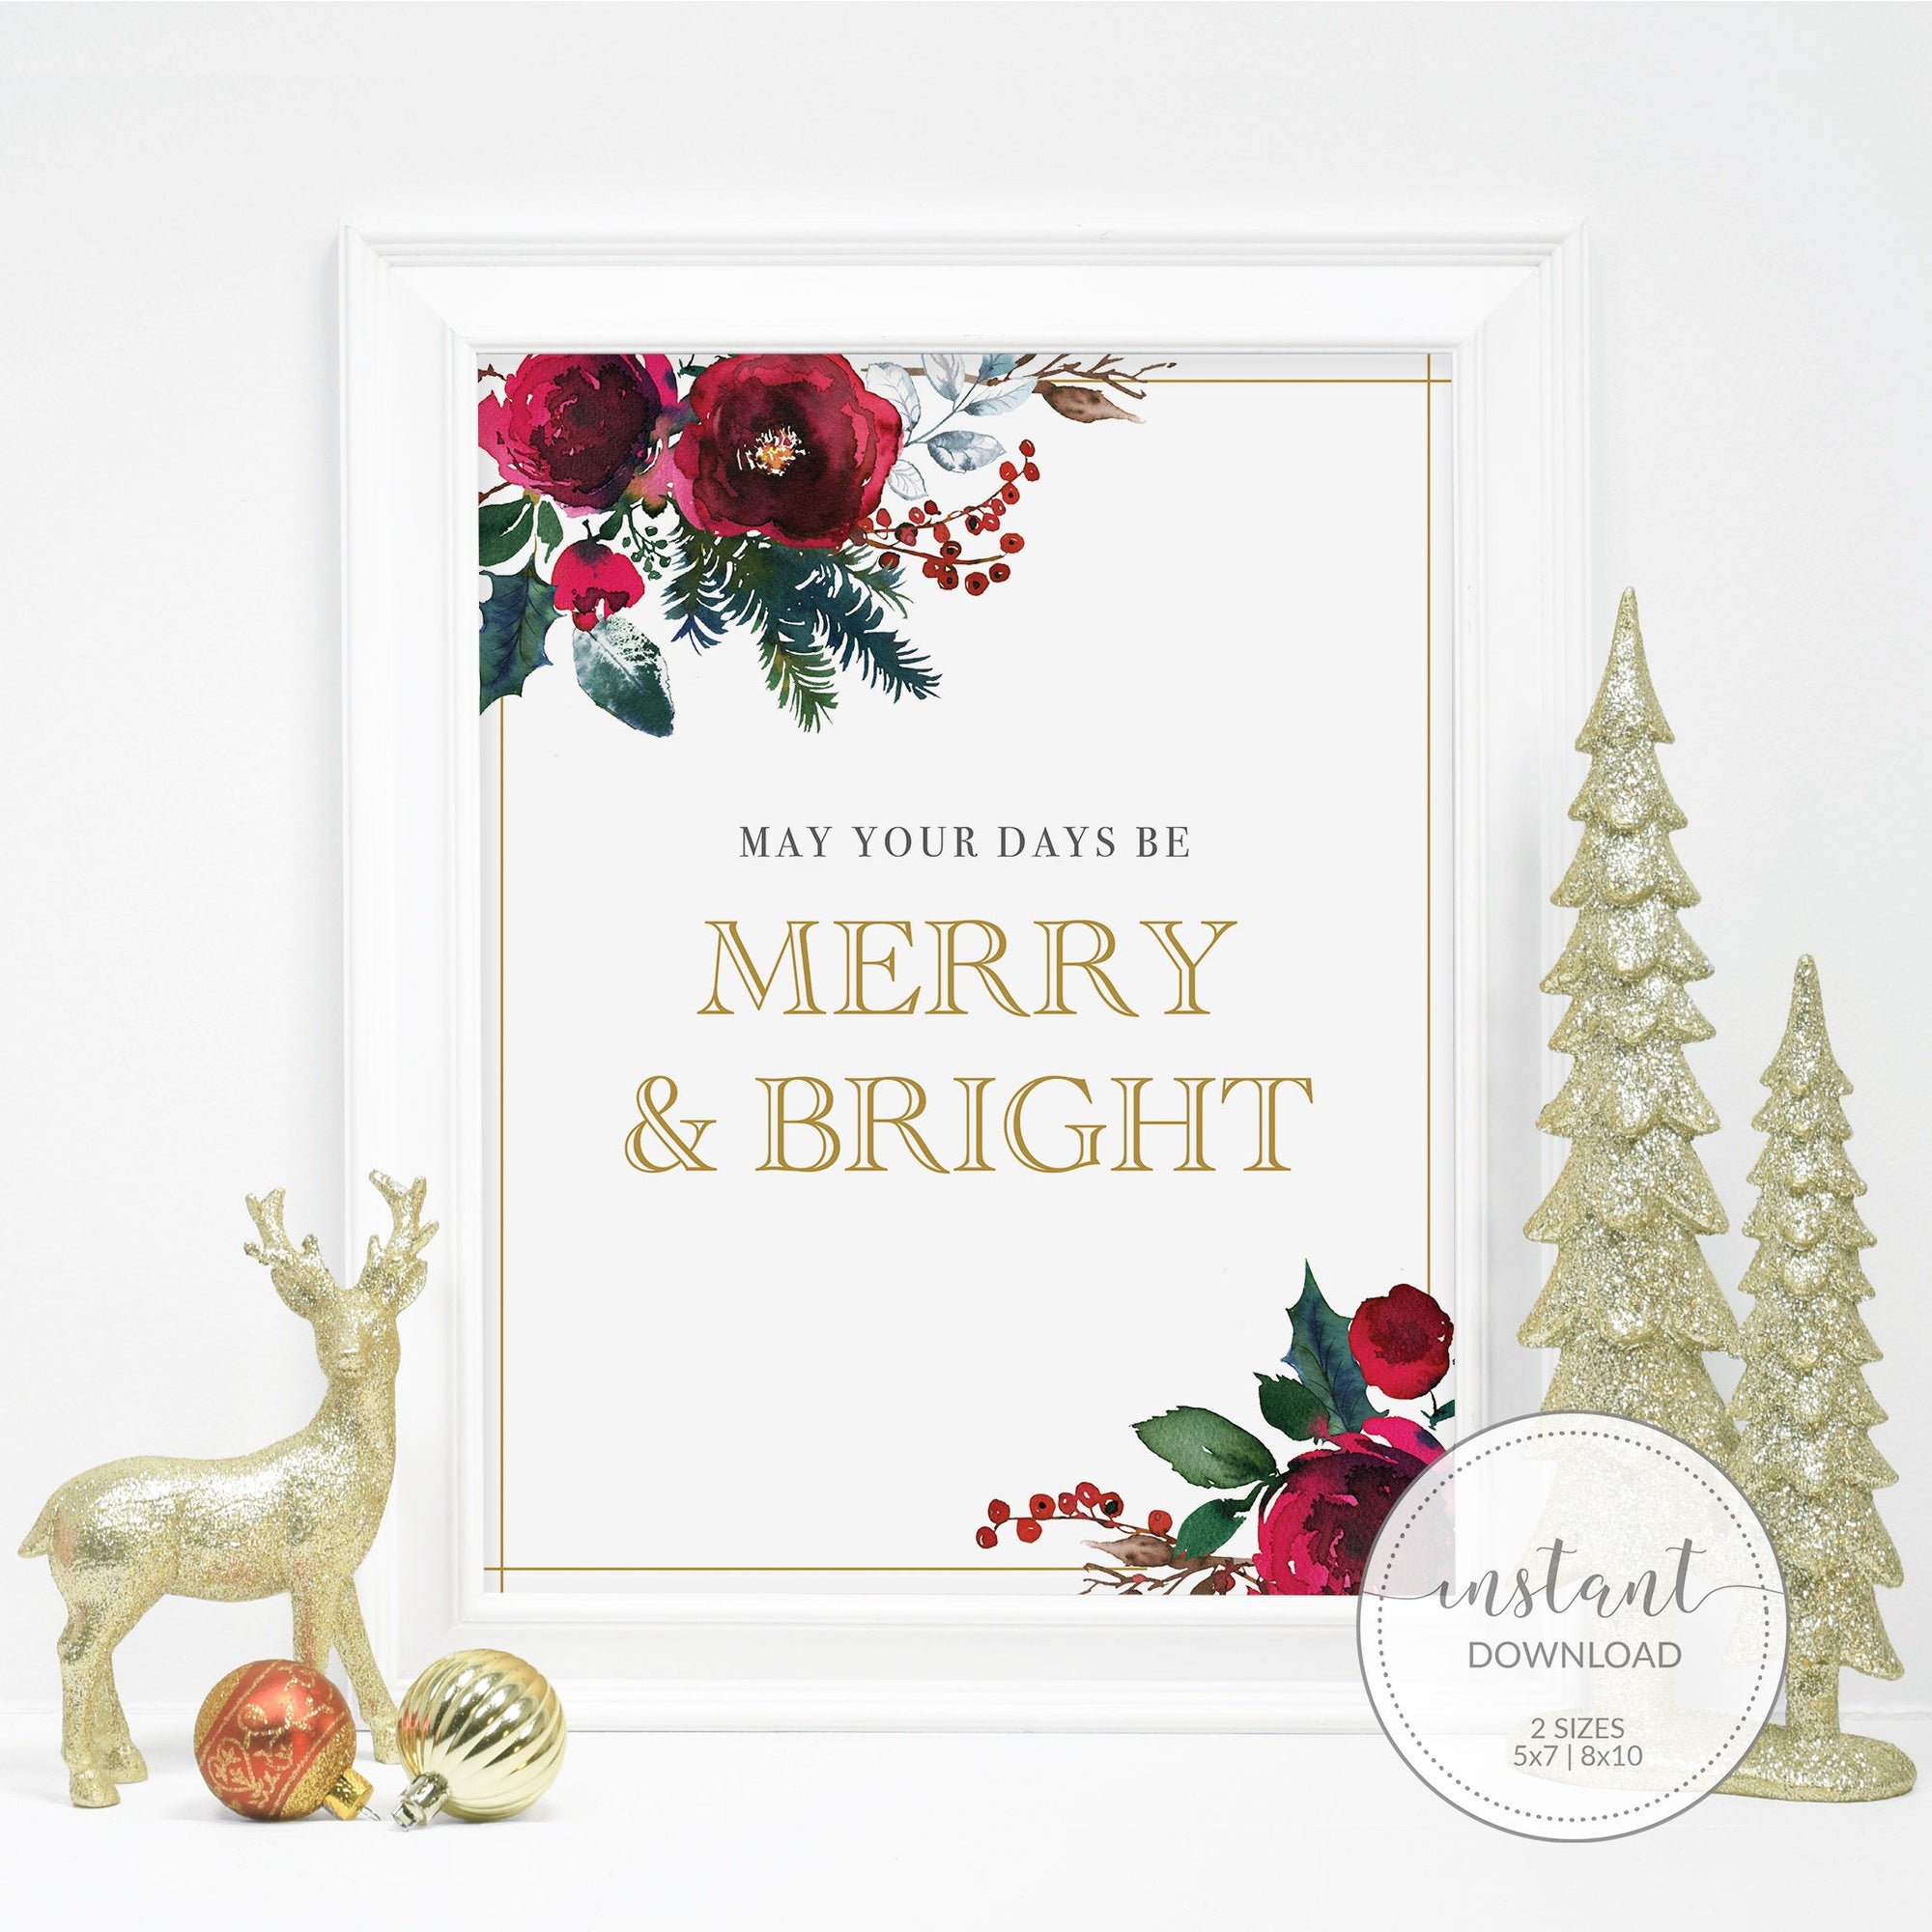 Merry and Bright Sign Printable, Holiday Decor, Holiday Party Printable Decorations, Holiday Party Decor, INSTANT DOWNLOAD - CG100 - @PlumPolkaDot 